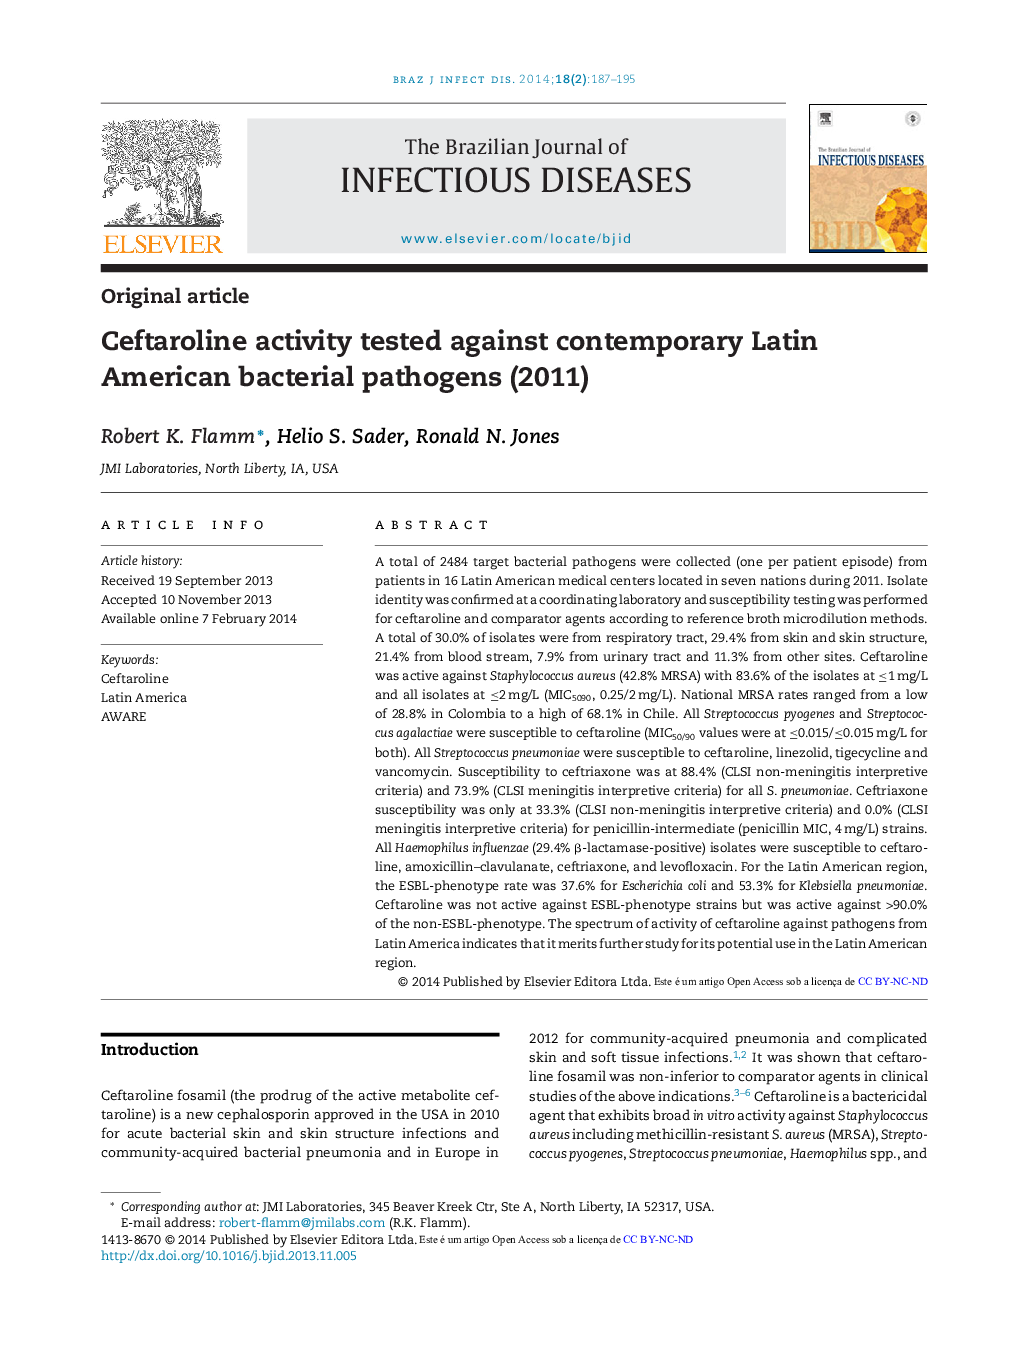 Ceftaroline activity tested against contemporary Latin American bacterial pathogens (2011)